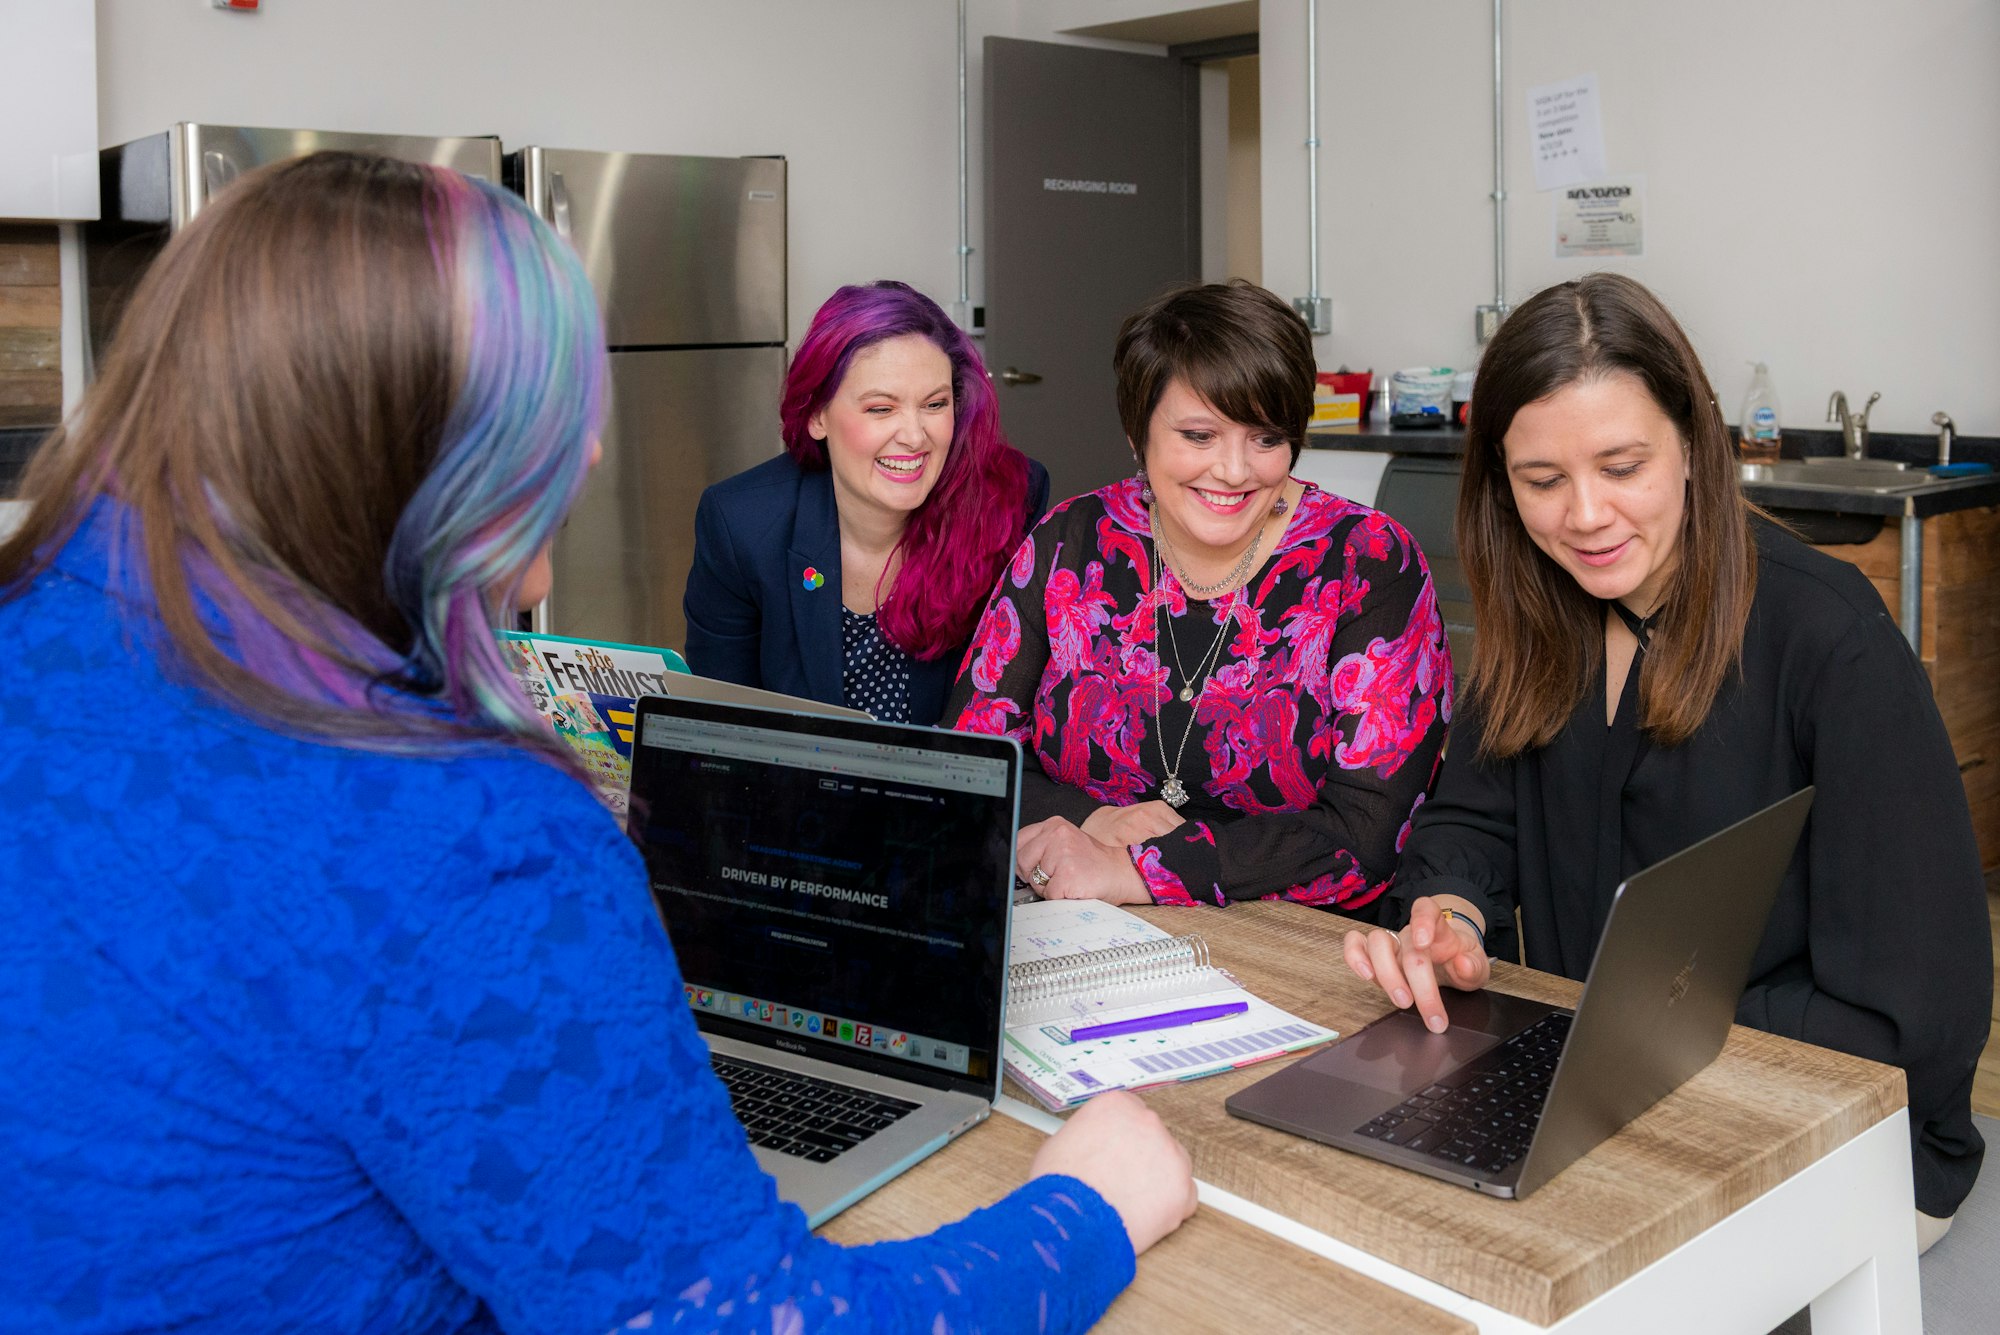 A small business employee meeting: 4 women looking at a laptop.